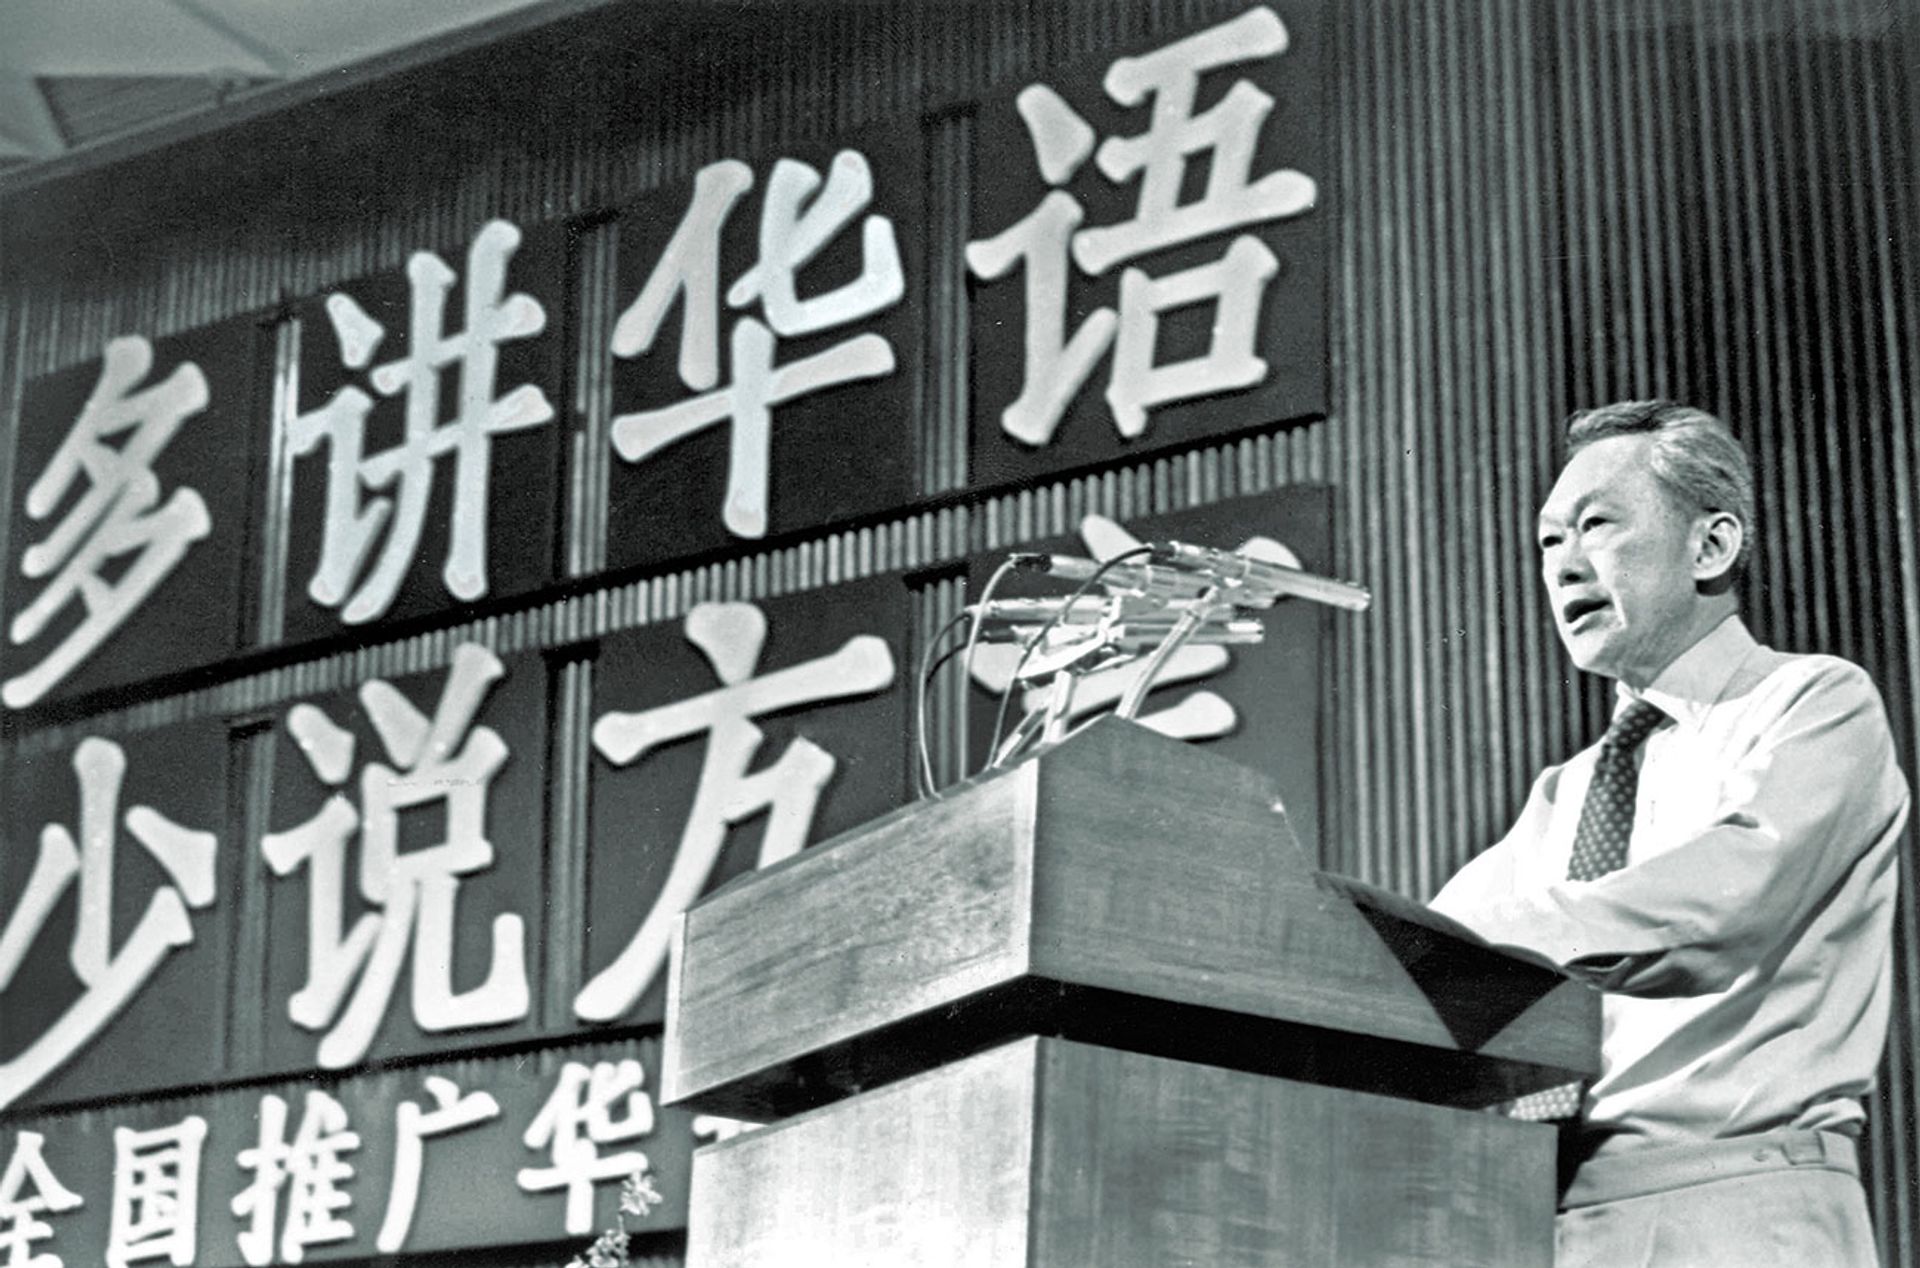 Mr Lee believed the use of Chinese dialects at home would hamper students’ ability to learn the Chinese language in school. On Sept 7, 1979, he launched the Speak Mandarin Campaign at the Singapore Conference Hall to encourage Chinese Singapore parents to speak more Mandarin and less dialect with their children. ST Photo: Tan Wee Him